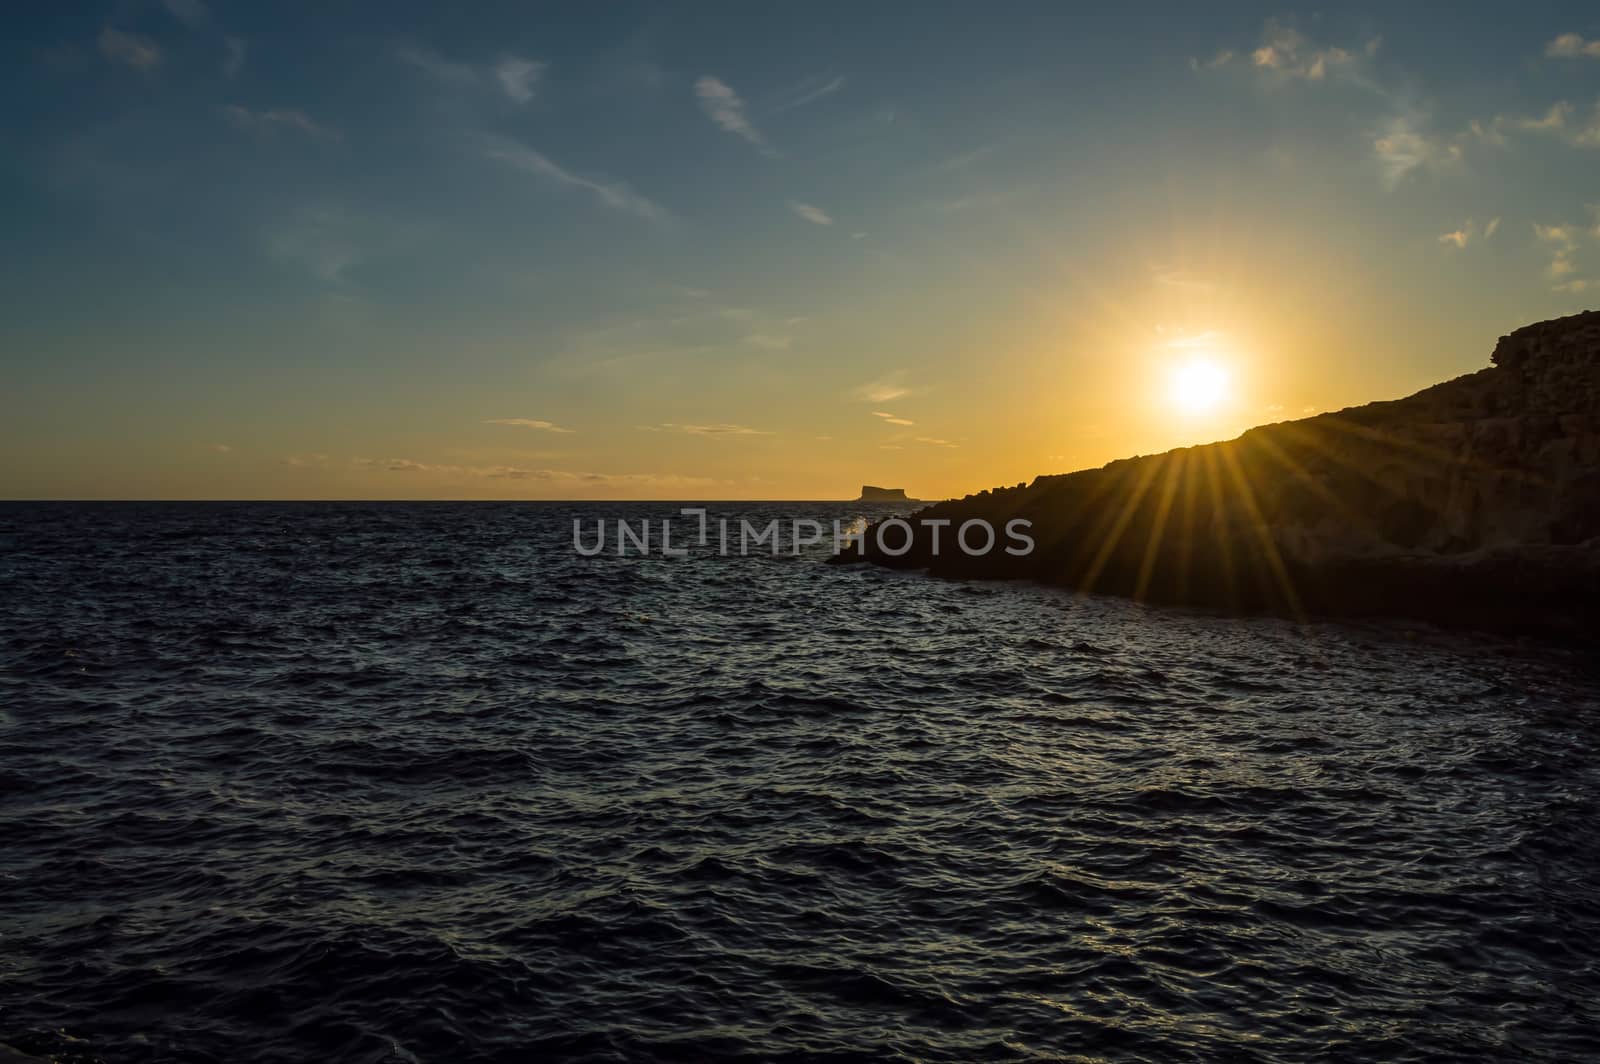 Sunset over the Mediterranean Sea viewed from the Island of Malta